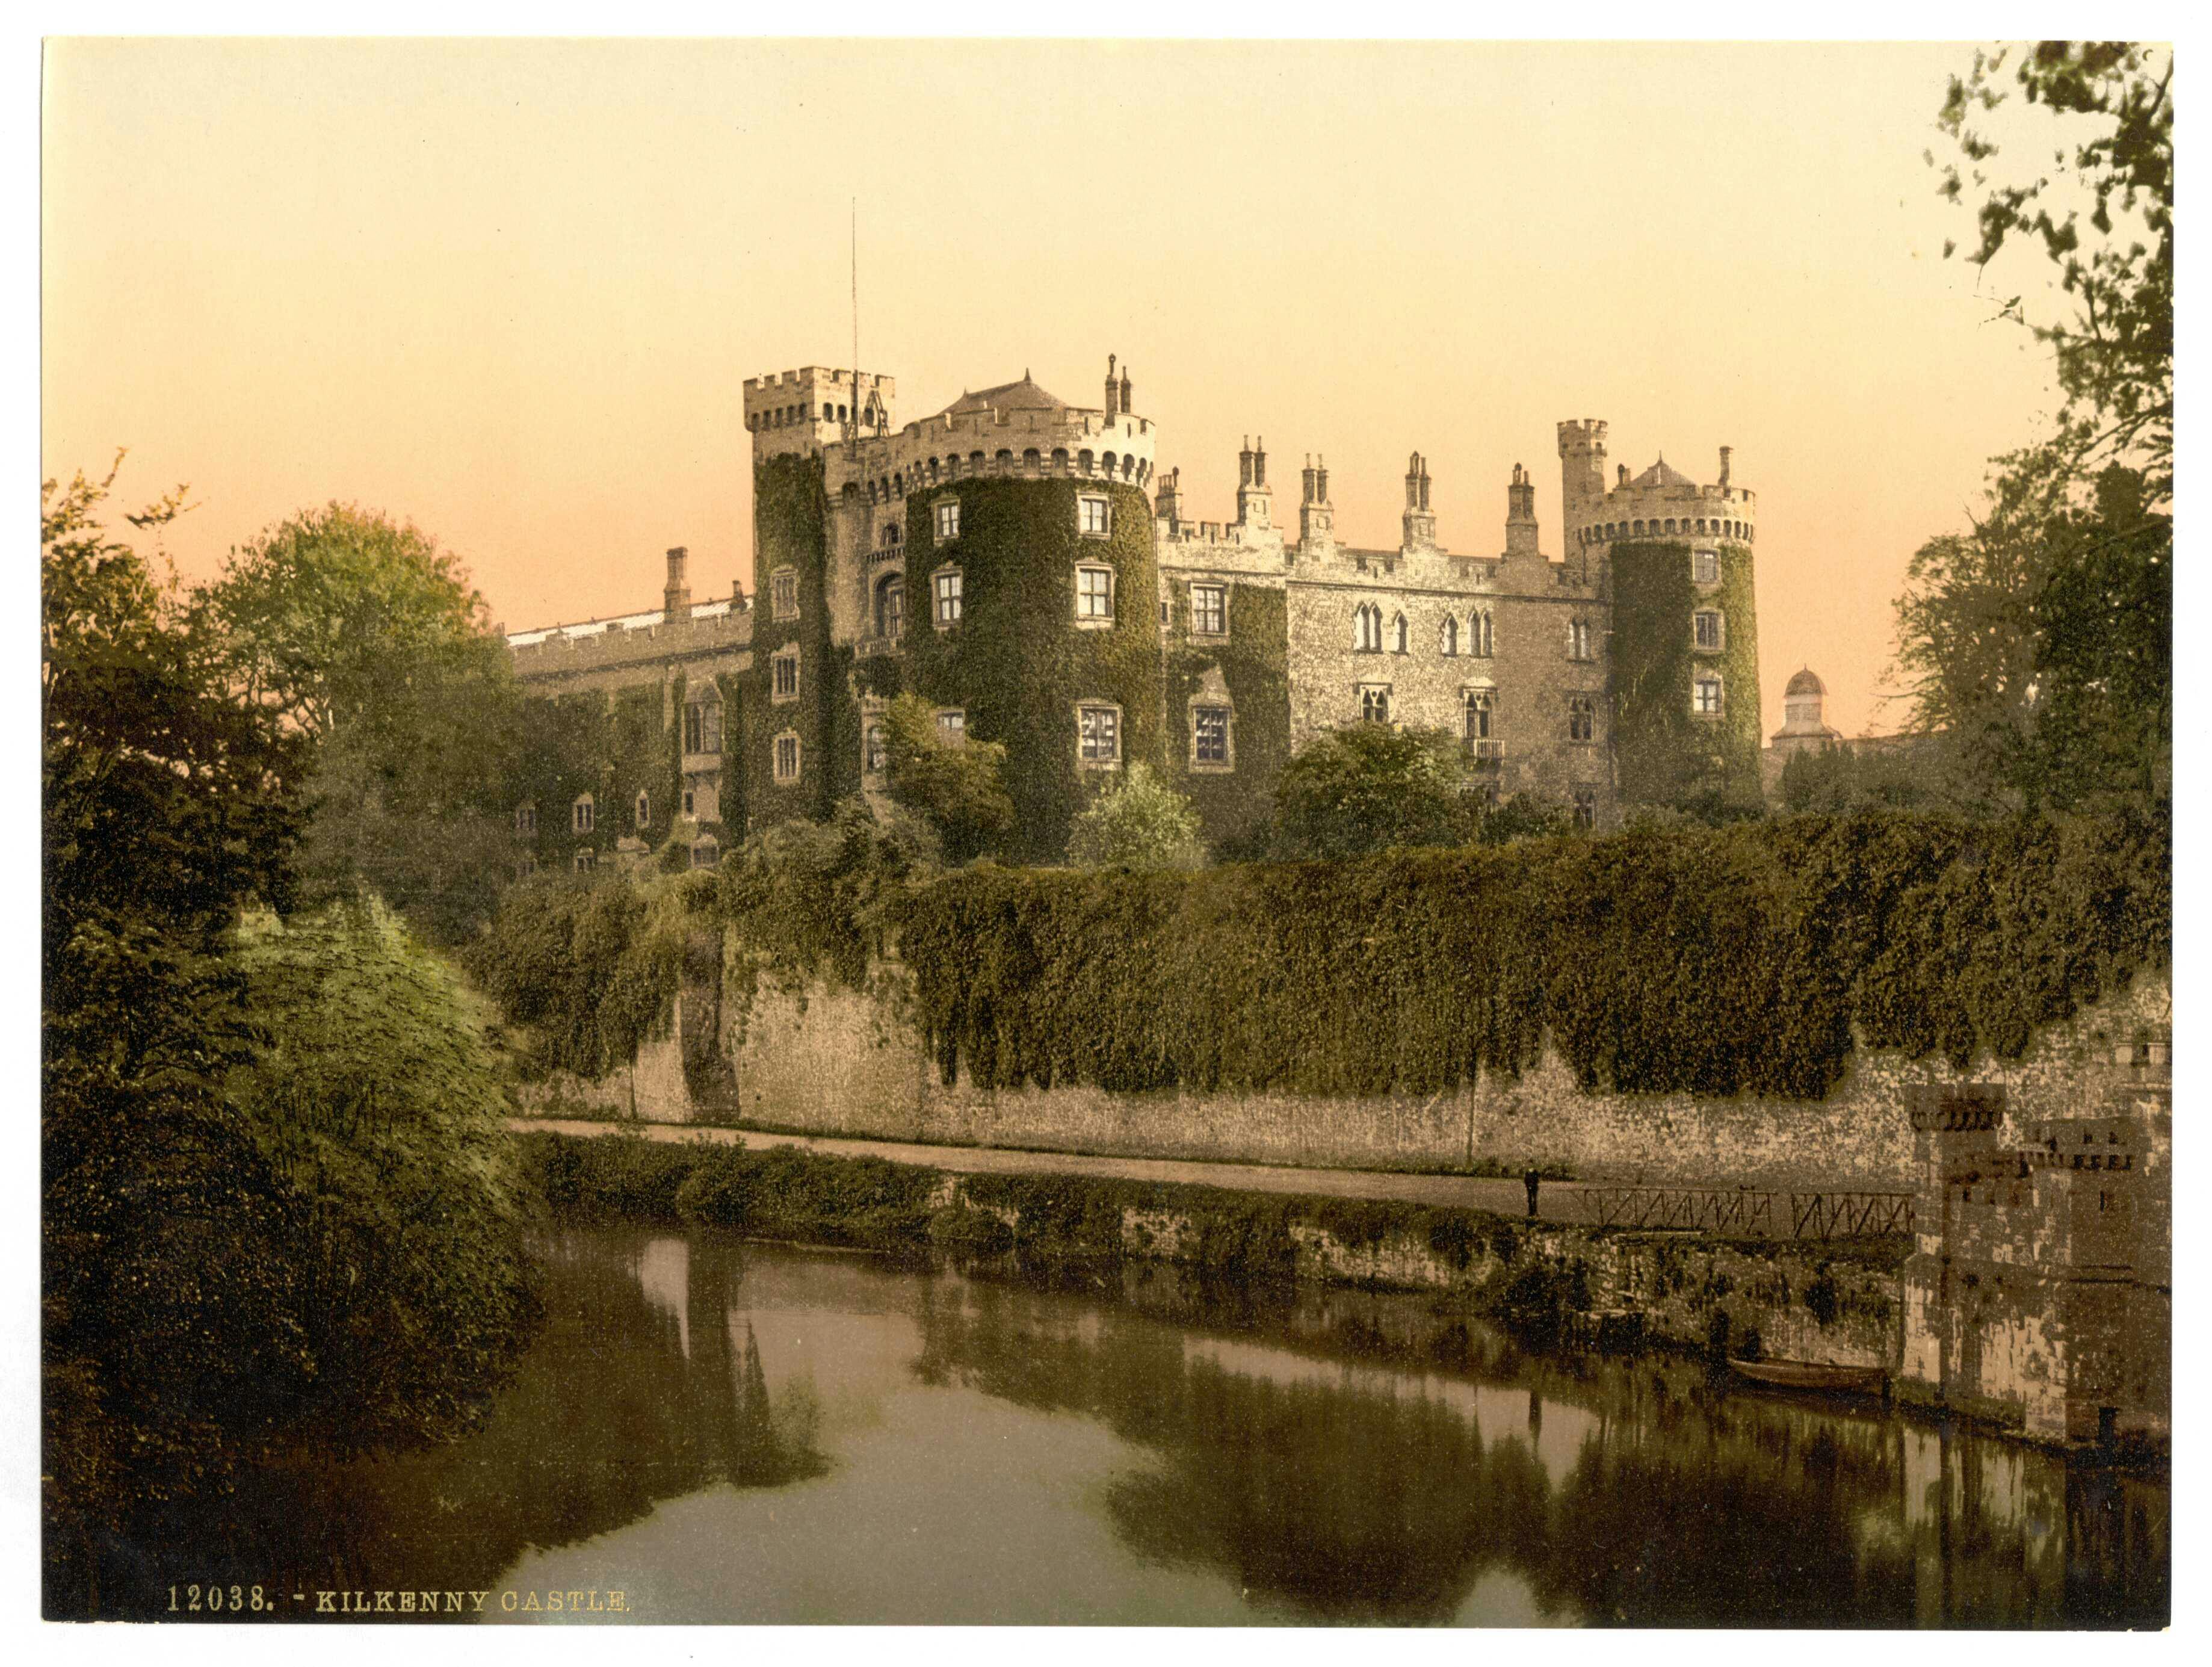 Kilkenny Castle, from the Views of Ireland collection